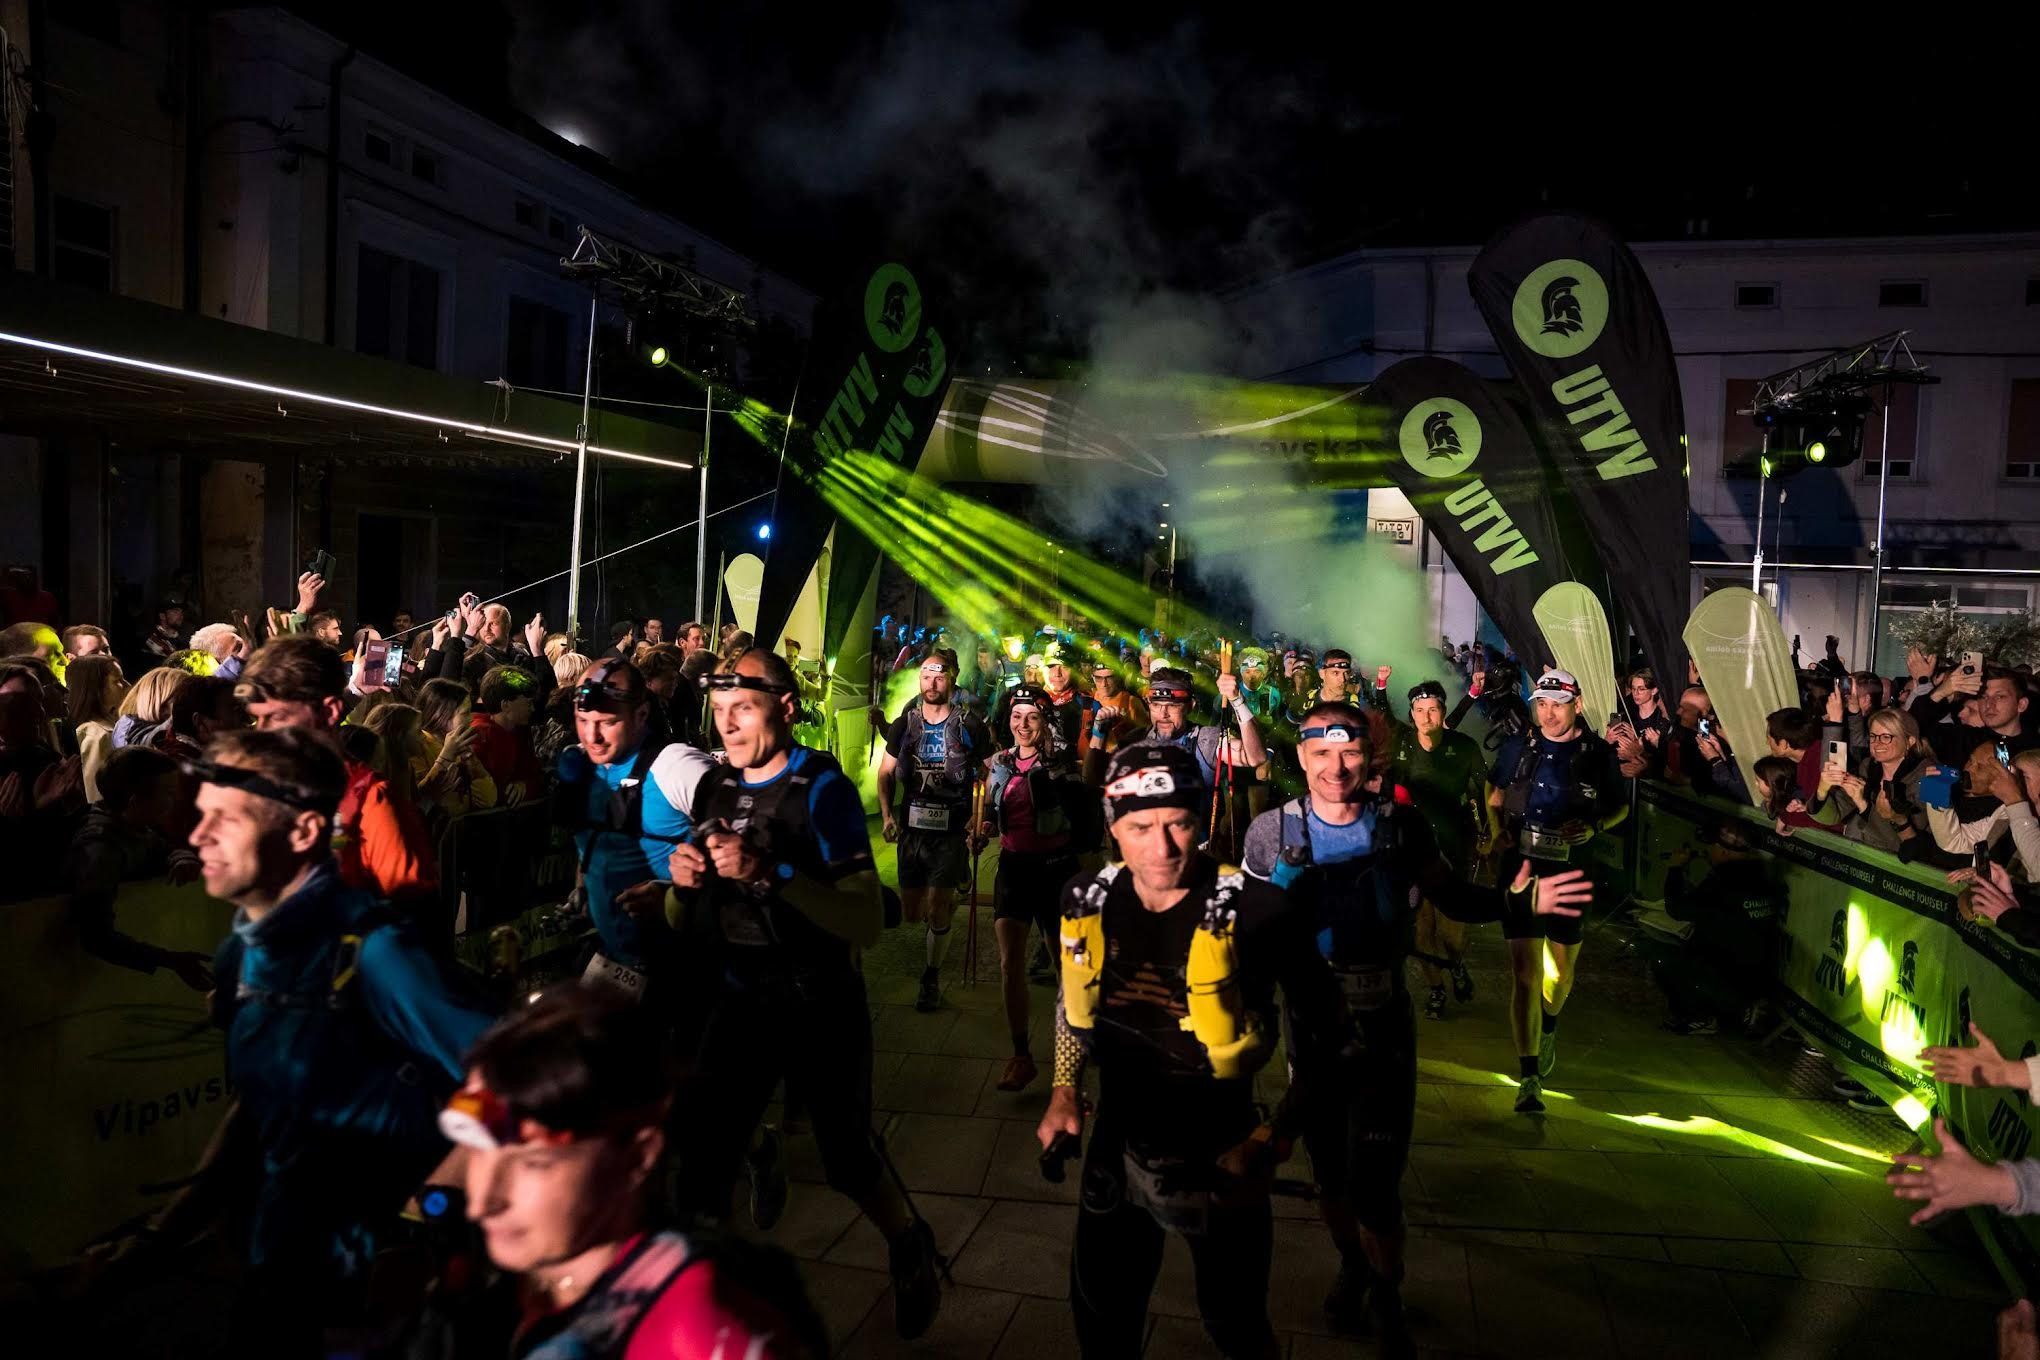 An electric atmosphere at the start of the 160km race at Ultra Trail Vipava Valley